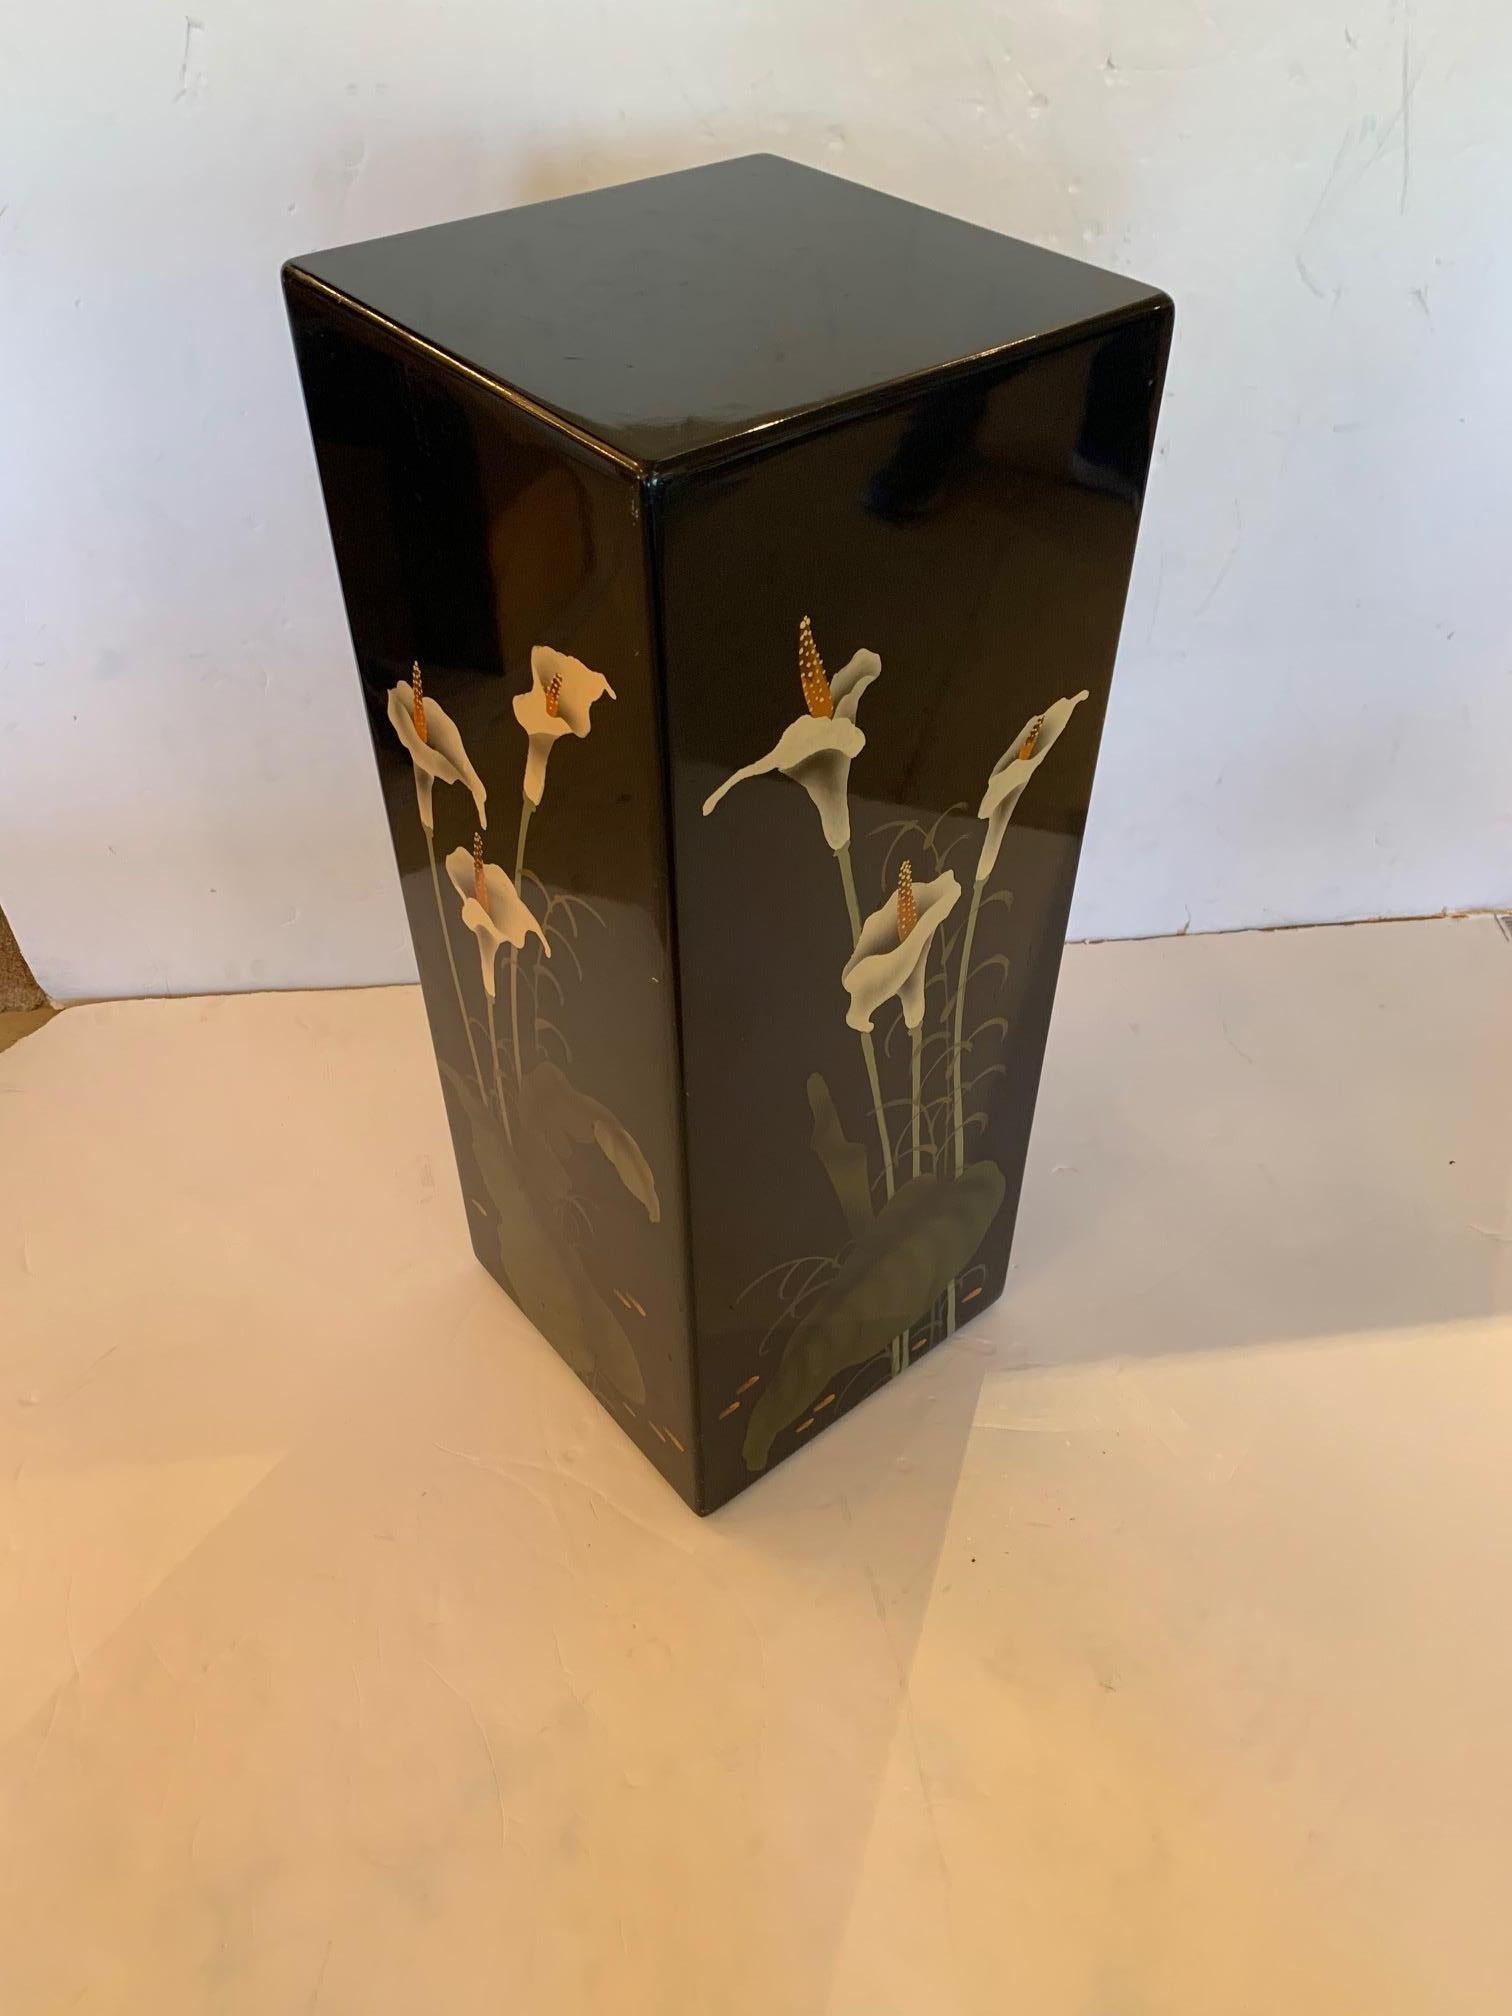 A beautiful stand or pedestal for displaying art or a plant that is like a piece of art itself having black lacquer background and striking painted decoration with calla lily flowers and leaves.